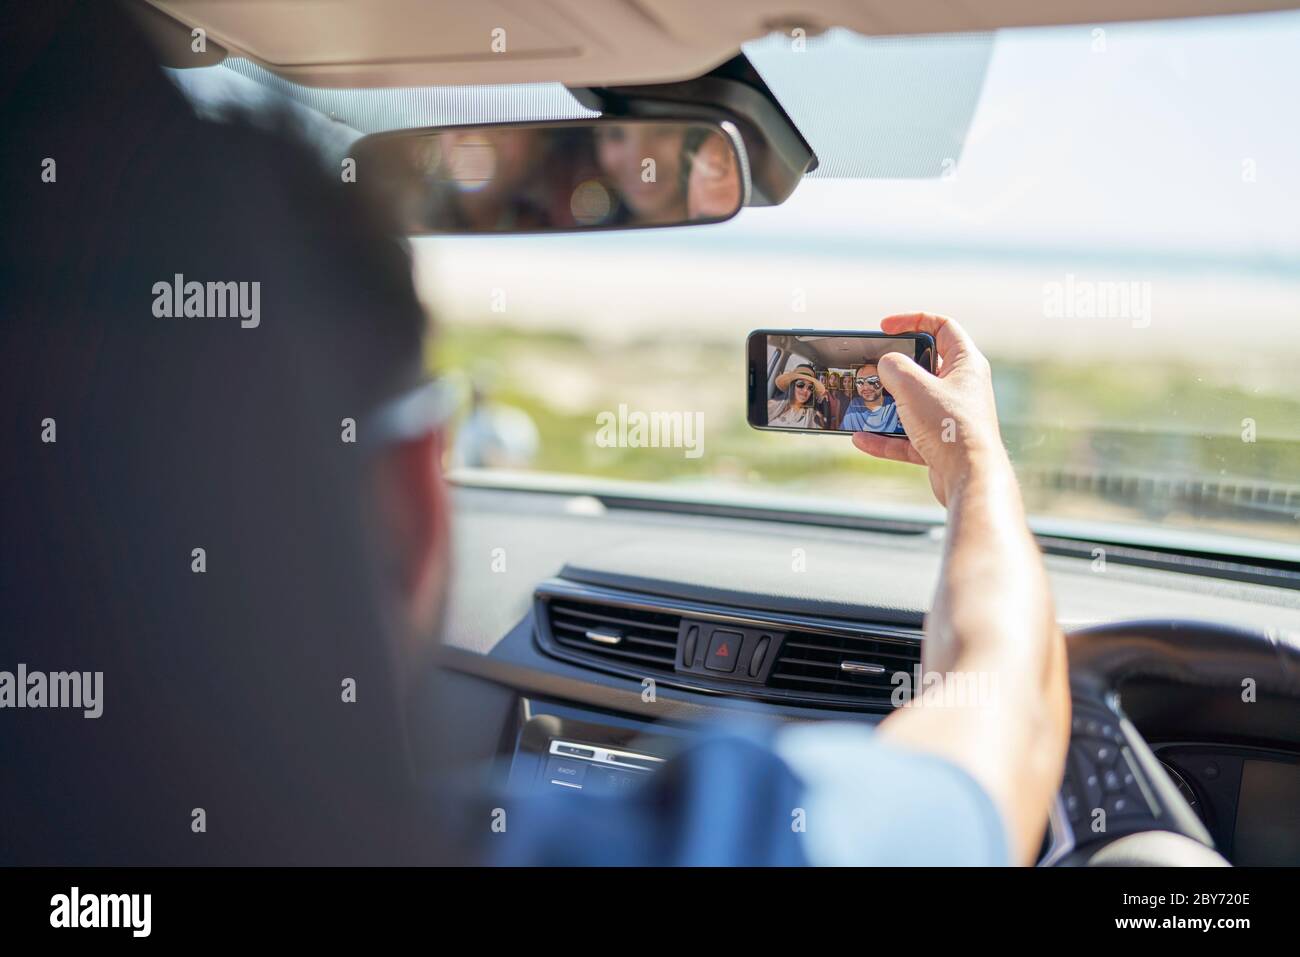 Family on road trip taking selfie with camera phone in sunny car Stock Photo